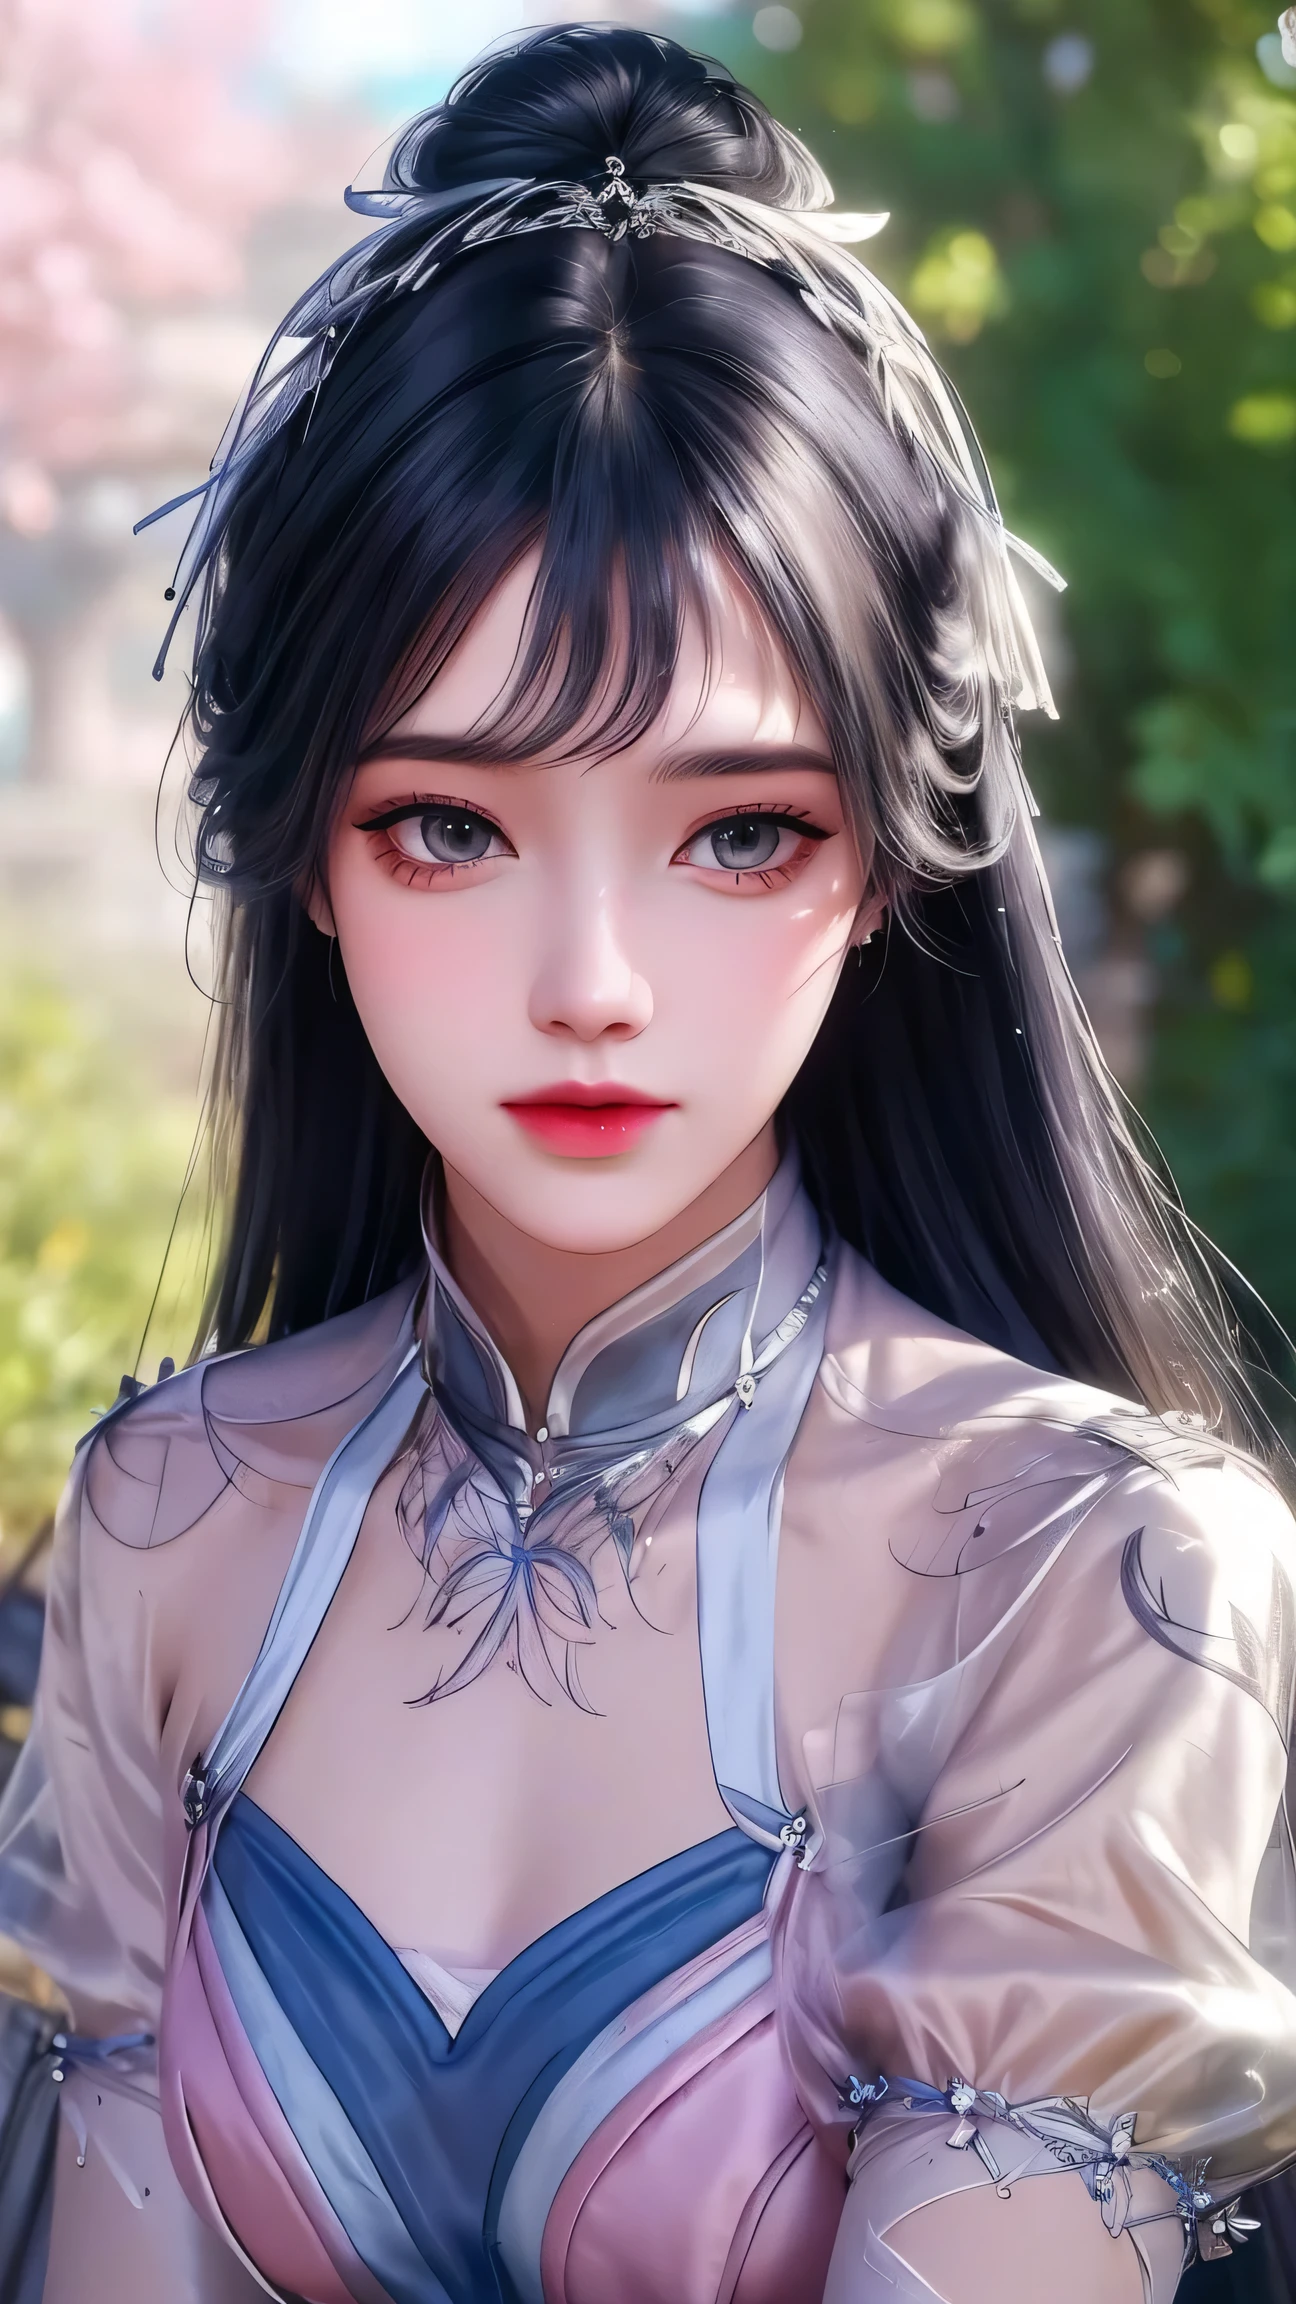 (best quality,ultra-detailed,photorealistic:1.37),vivid colors,studio lighting,beautiful detailed eyes,beautiful detailed lips,extremely detailed eyes and face,long eyelashes,portraits,blue hair,confident expression,feminine,standing in a garden,soft sunlight, scenery,flower blossoms,peaceful atmosphere,artistic touch,textured brushstrokes,subtle color variations,brilliant white highlights,delicate movements,graceful pose,slight breeze,rustling leaves,sophisticated style,professional artwork,female beauty.